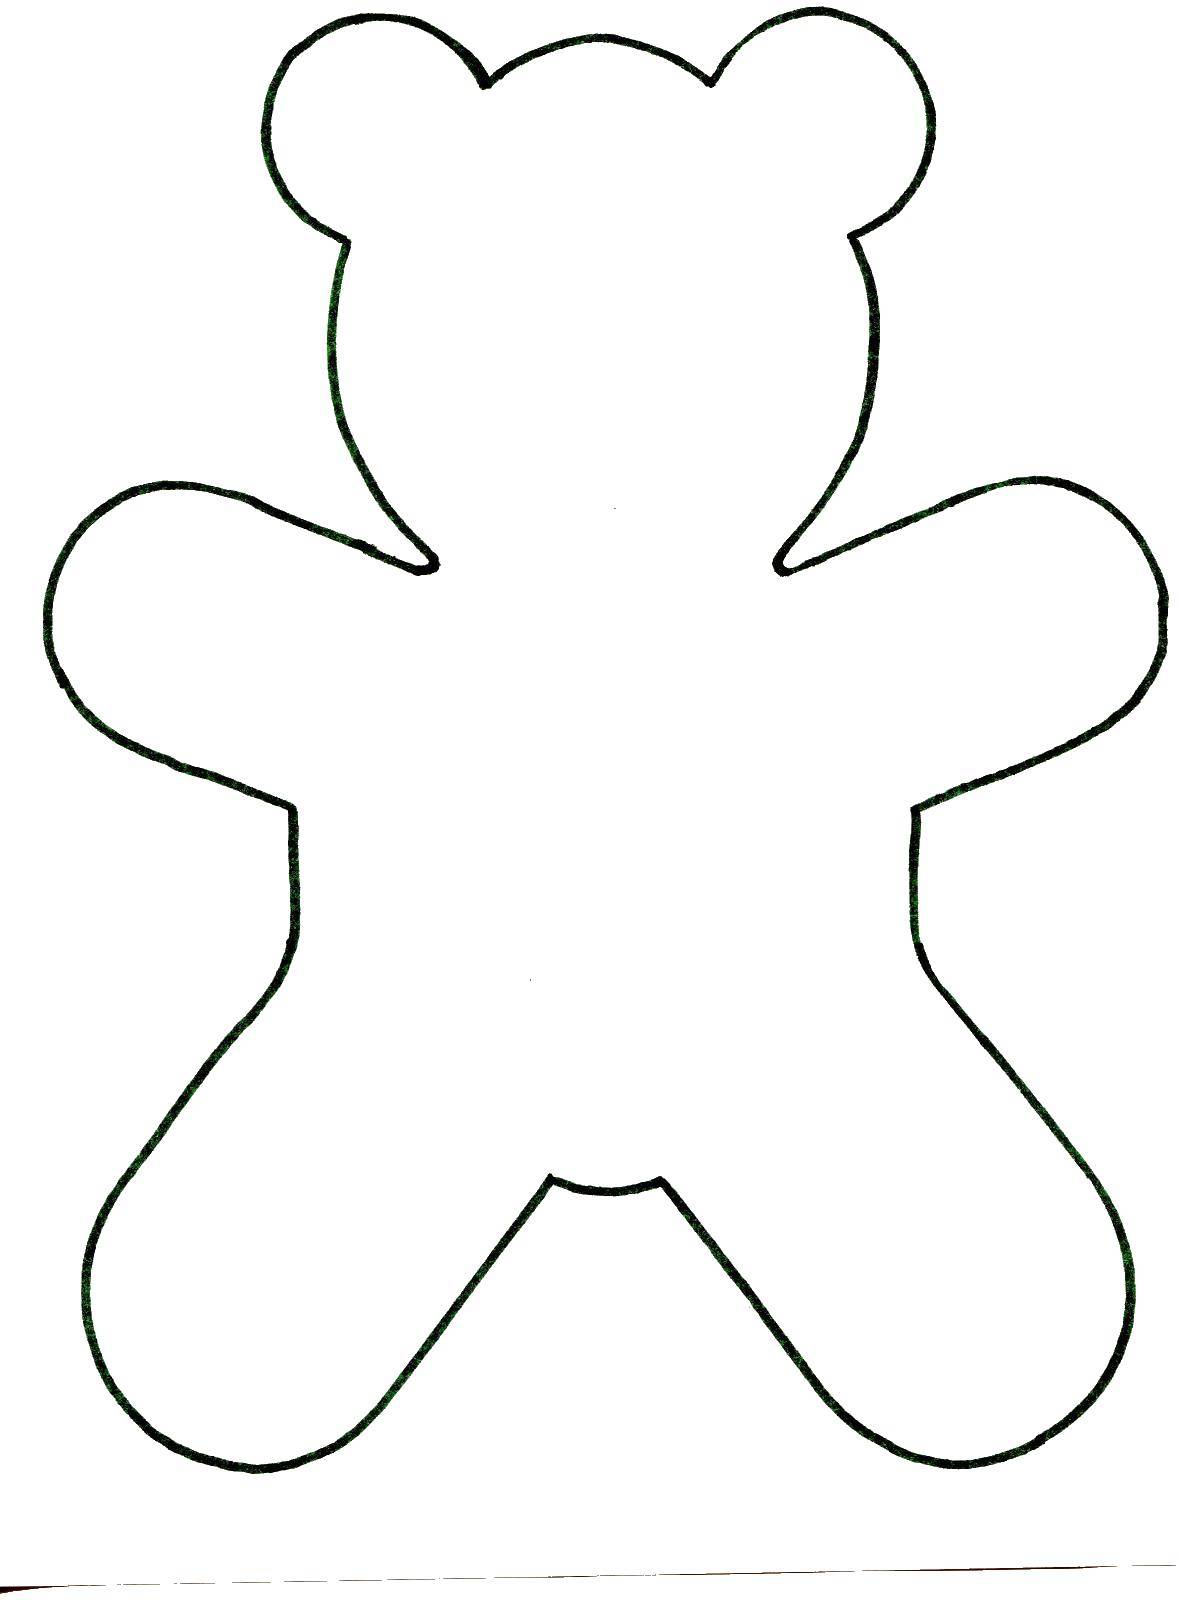 Coloring The contour bears. Category The outline of a bear to cut. Tags:  outline , bear.